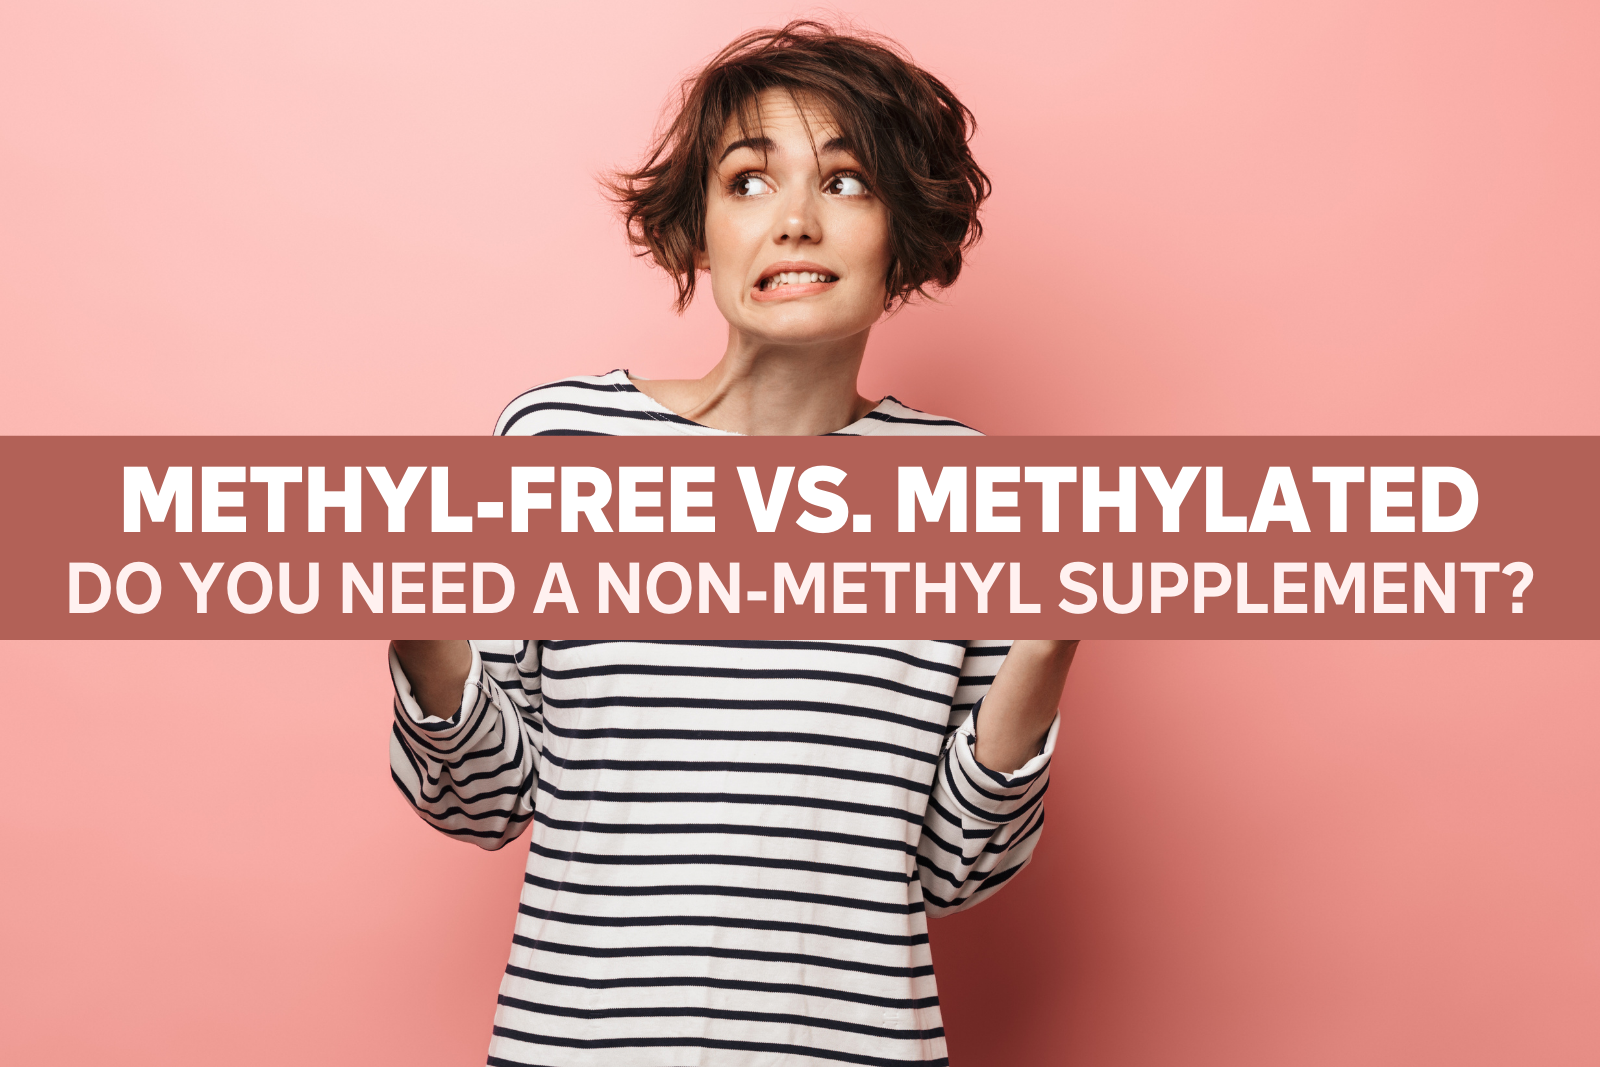 Methyl-Free vs. Methylated: Do You Need a Non-Methylated Supplement?